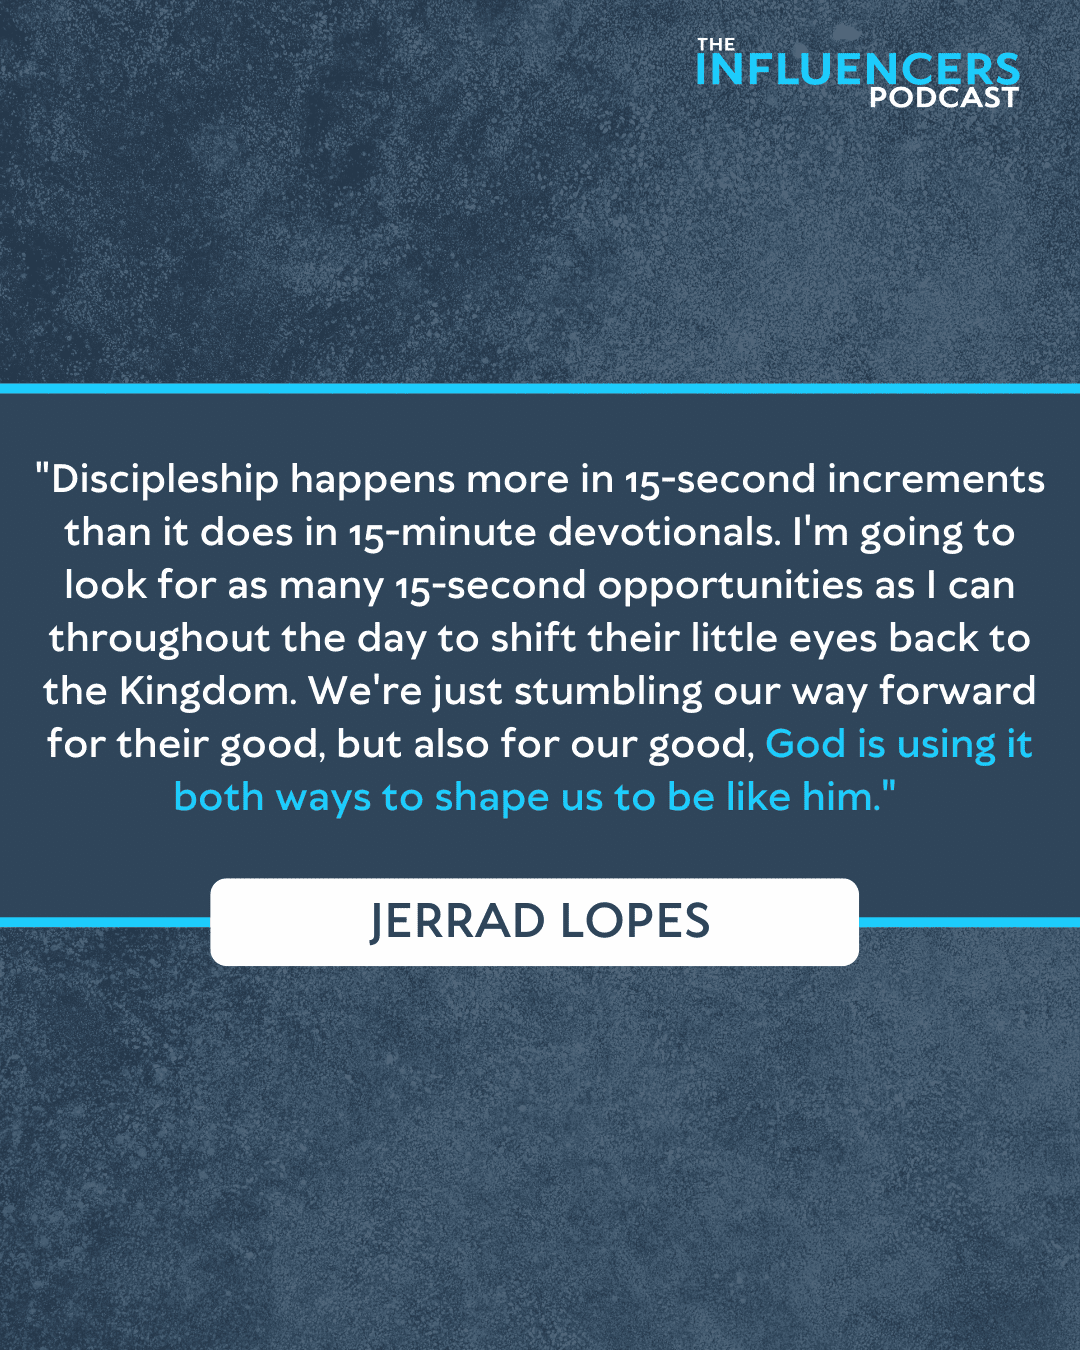 Episode 88 Quote by Jerrad Lopes.